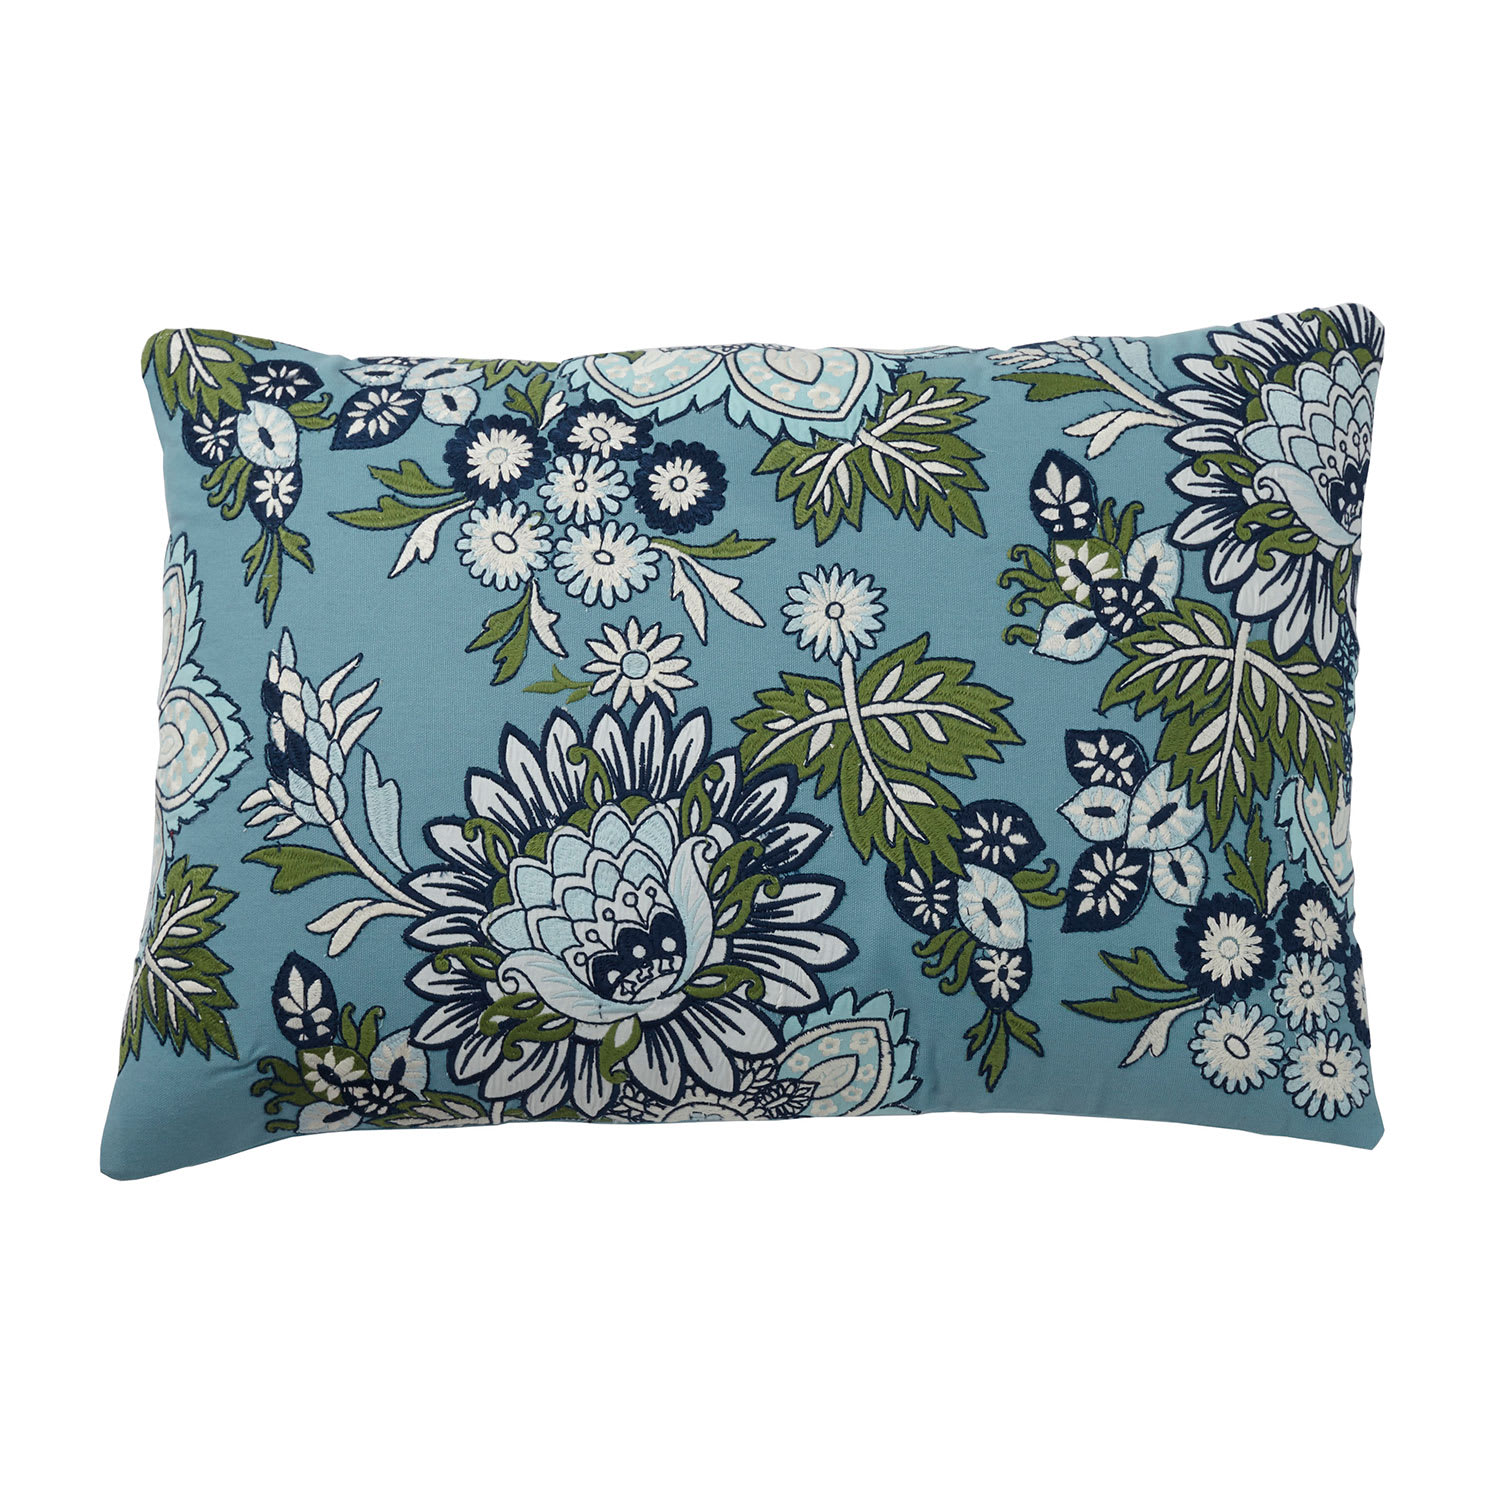 Blue Floral Embroidered Pillow Cover - Floral